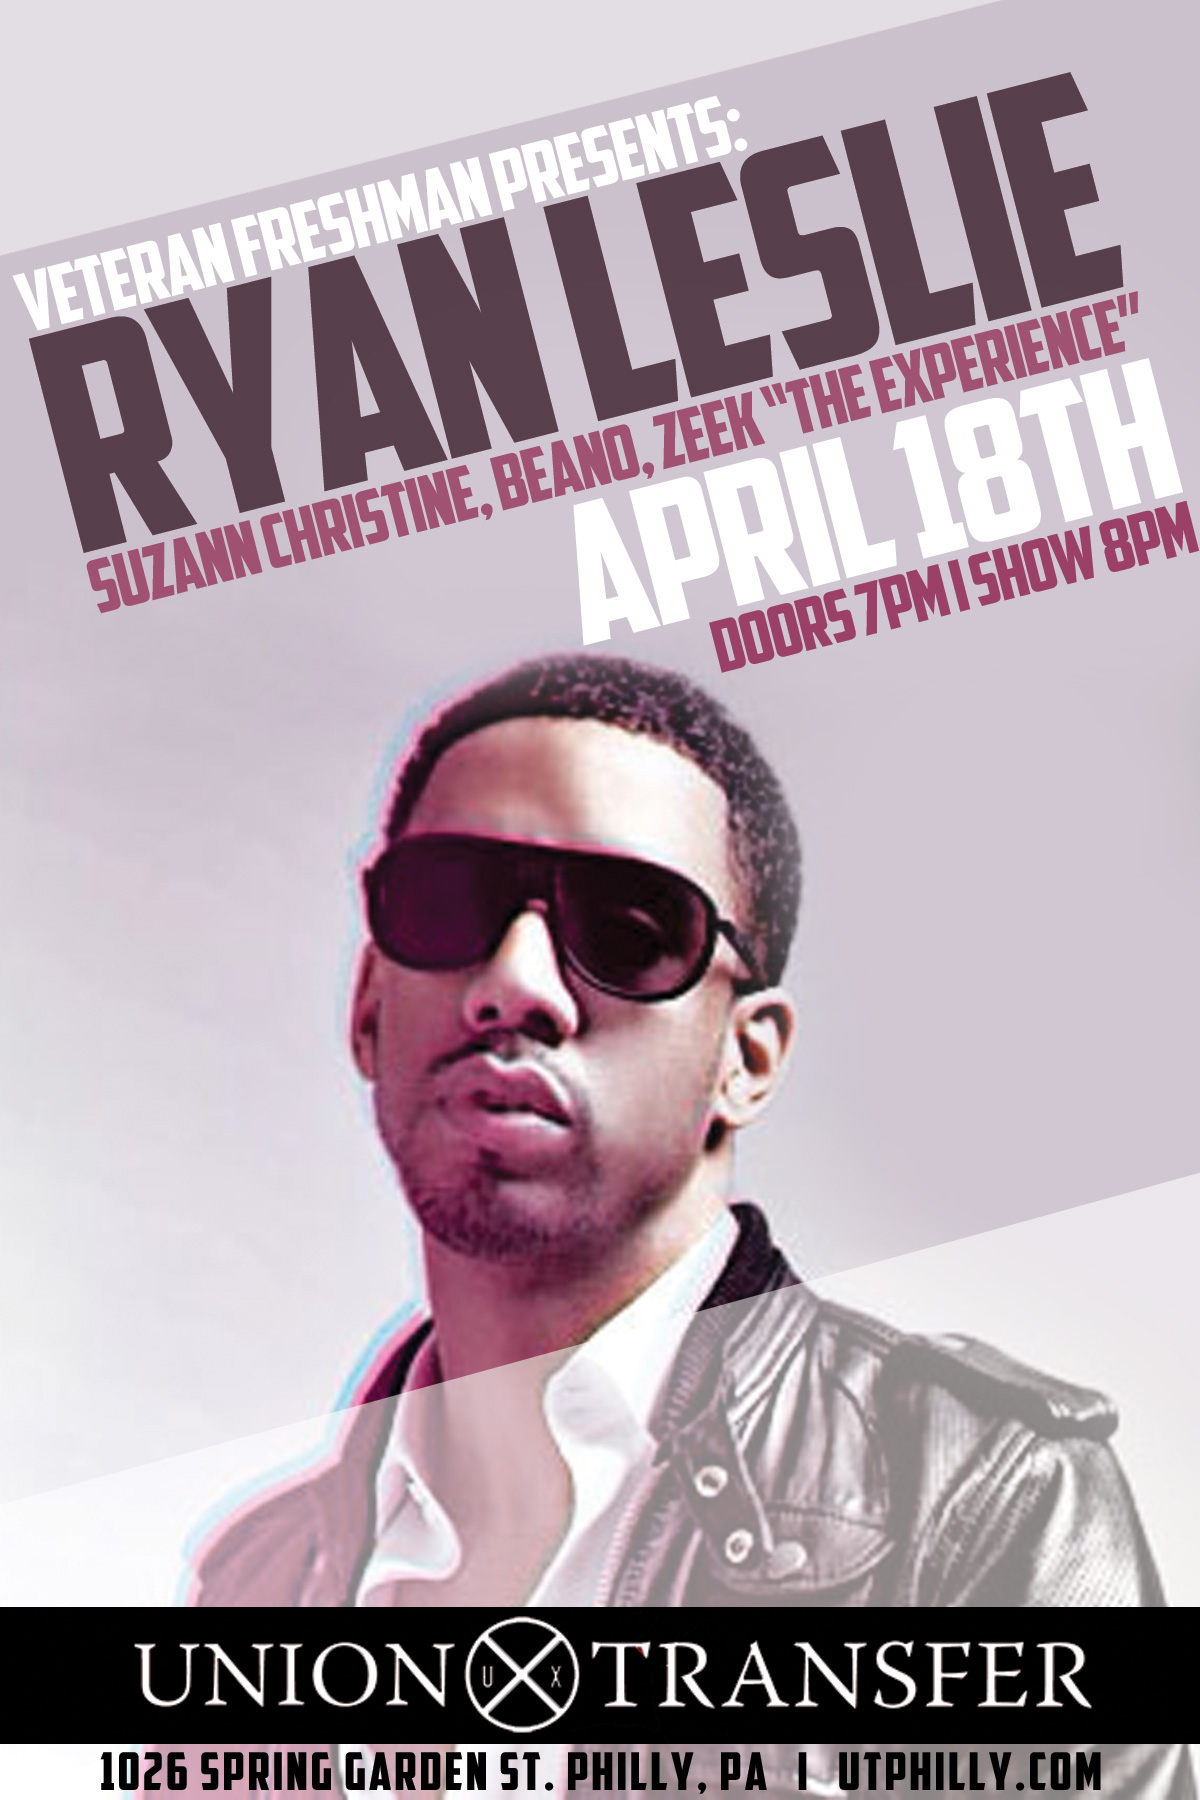 win-tickets-to-see-ryan-leslie-live-at-philly-april-18th-HHS1987-2013 Win Tickets To See Ryan Leslie Live In Philly April 18th  